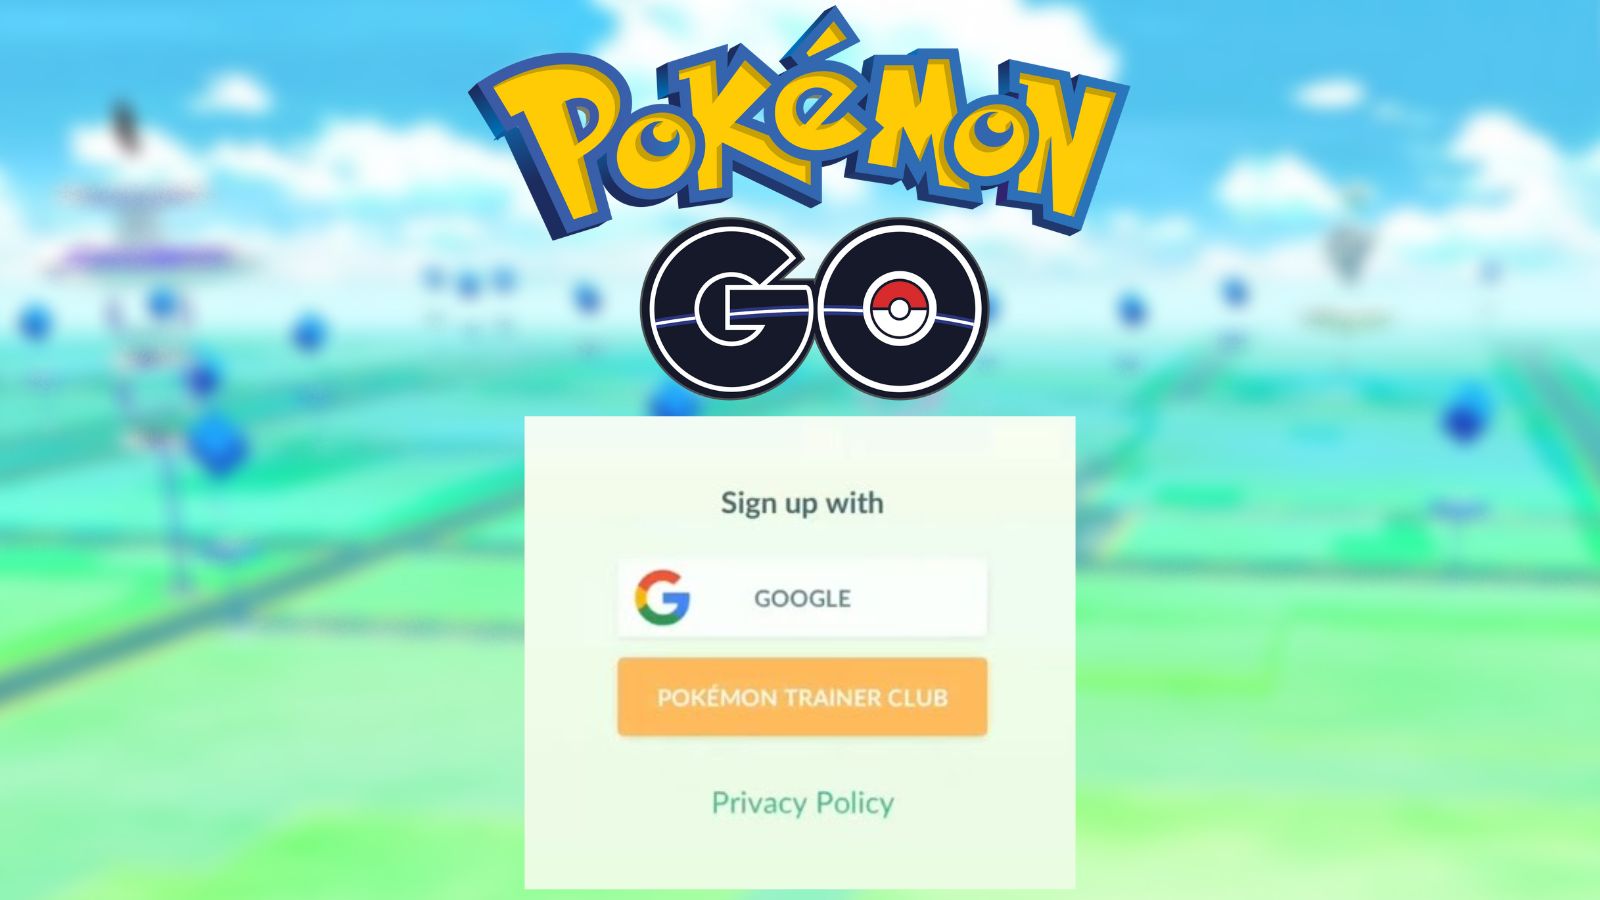 Easiest Way to Create a Pokemon Trainer Club Account